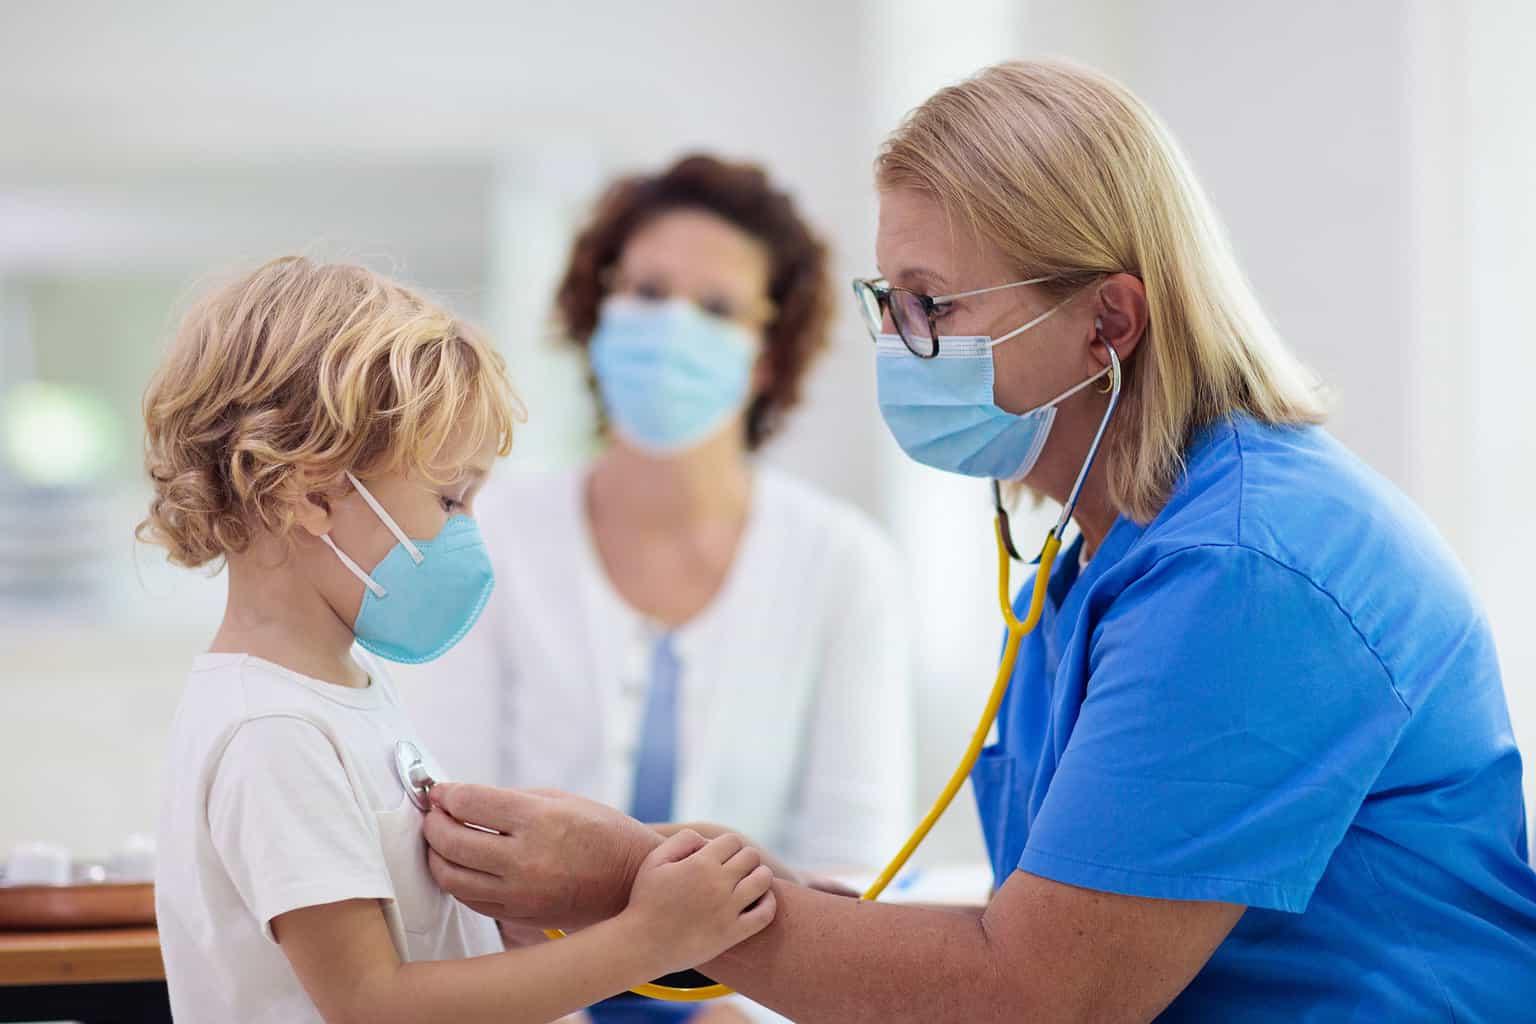 Doctor examining sick child in face mask for rsv virus, rsv, respiratory syncytial virus, infectious virus